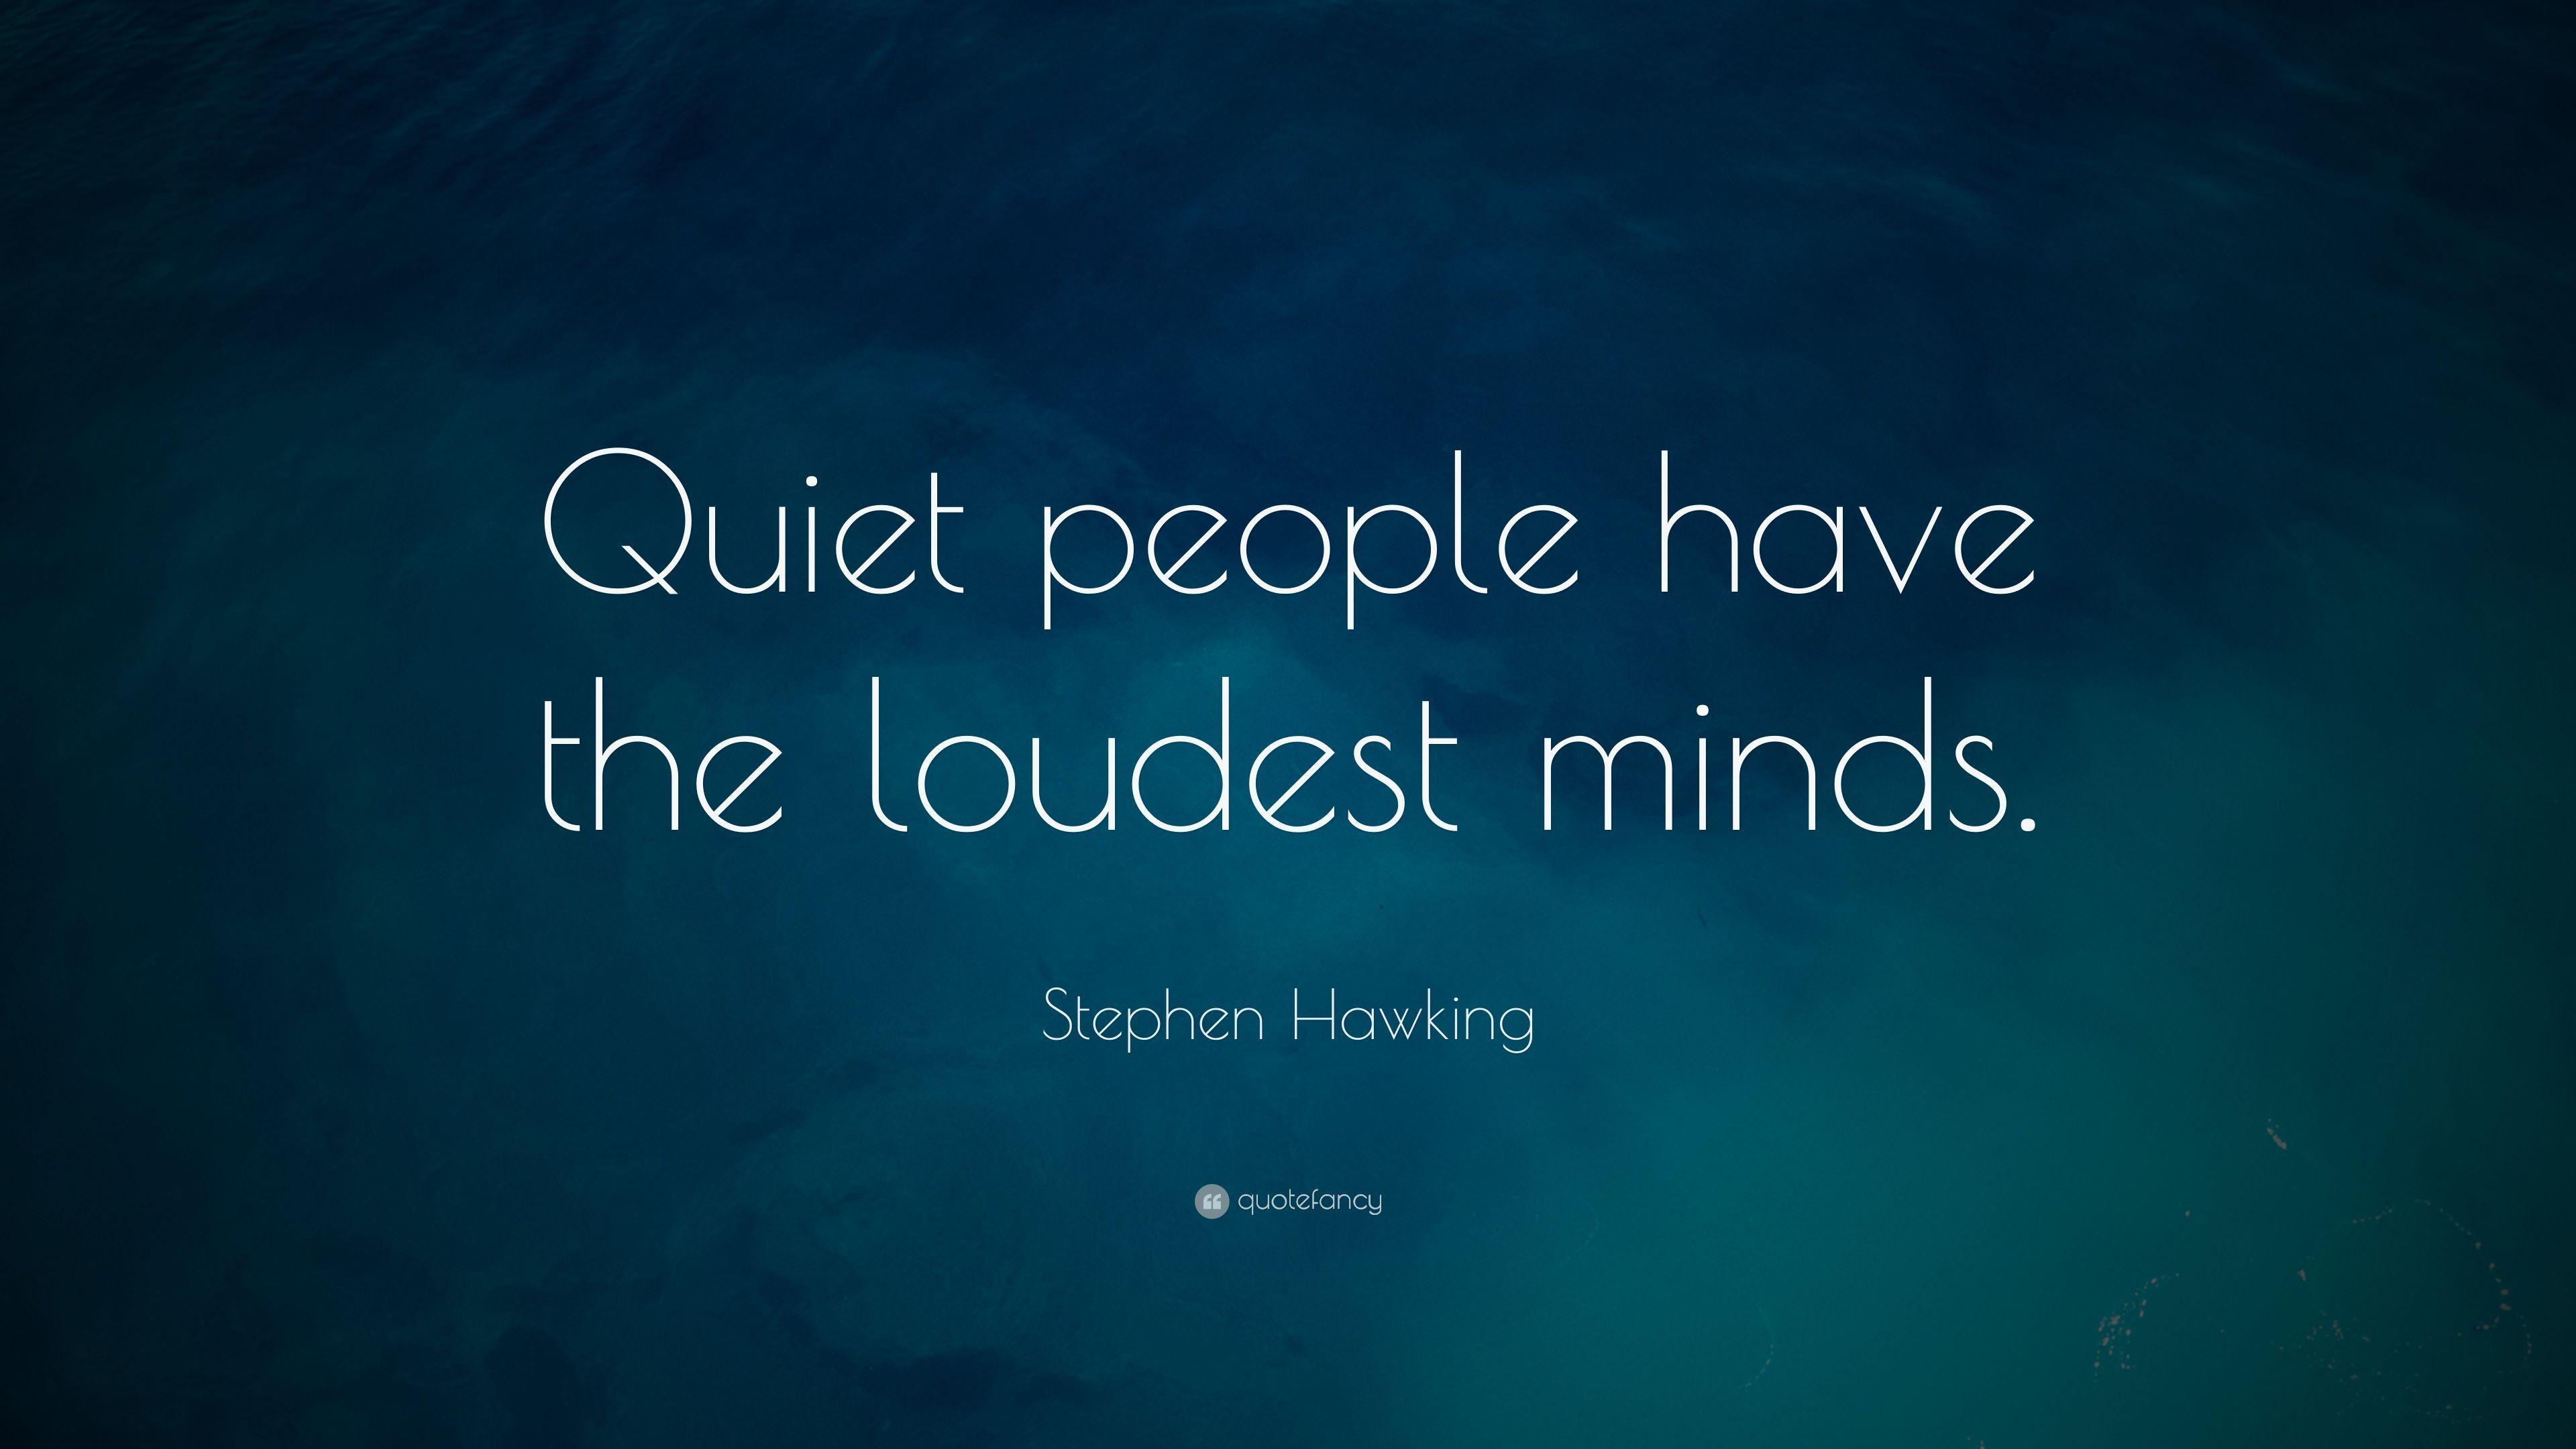 Stephen Hawking Quote: “Quiet people have the loudest minds.”